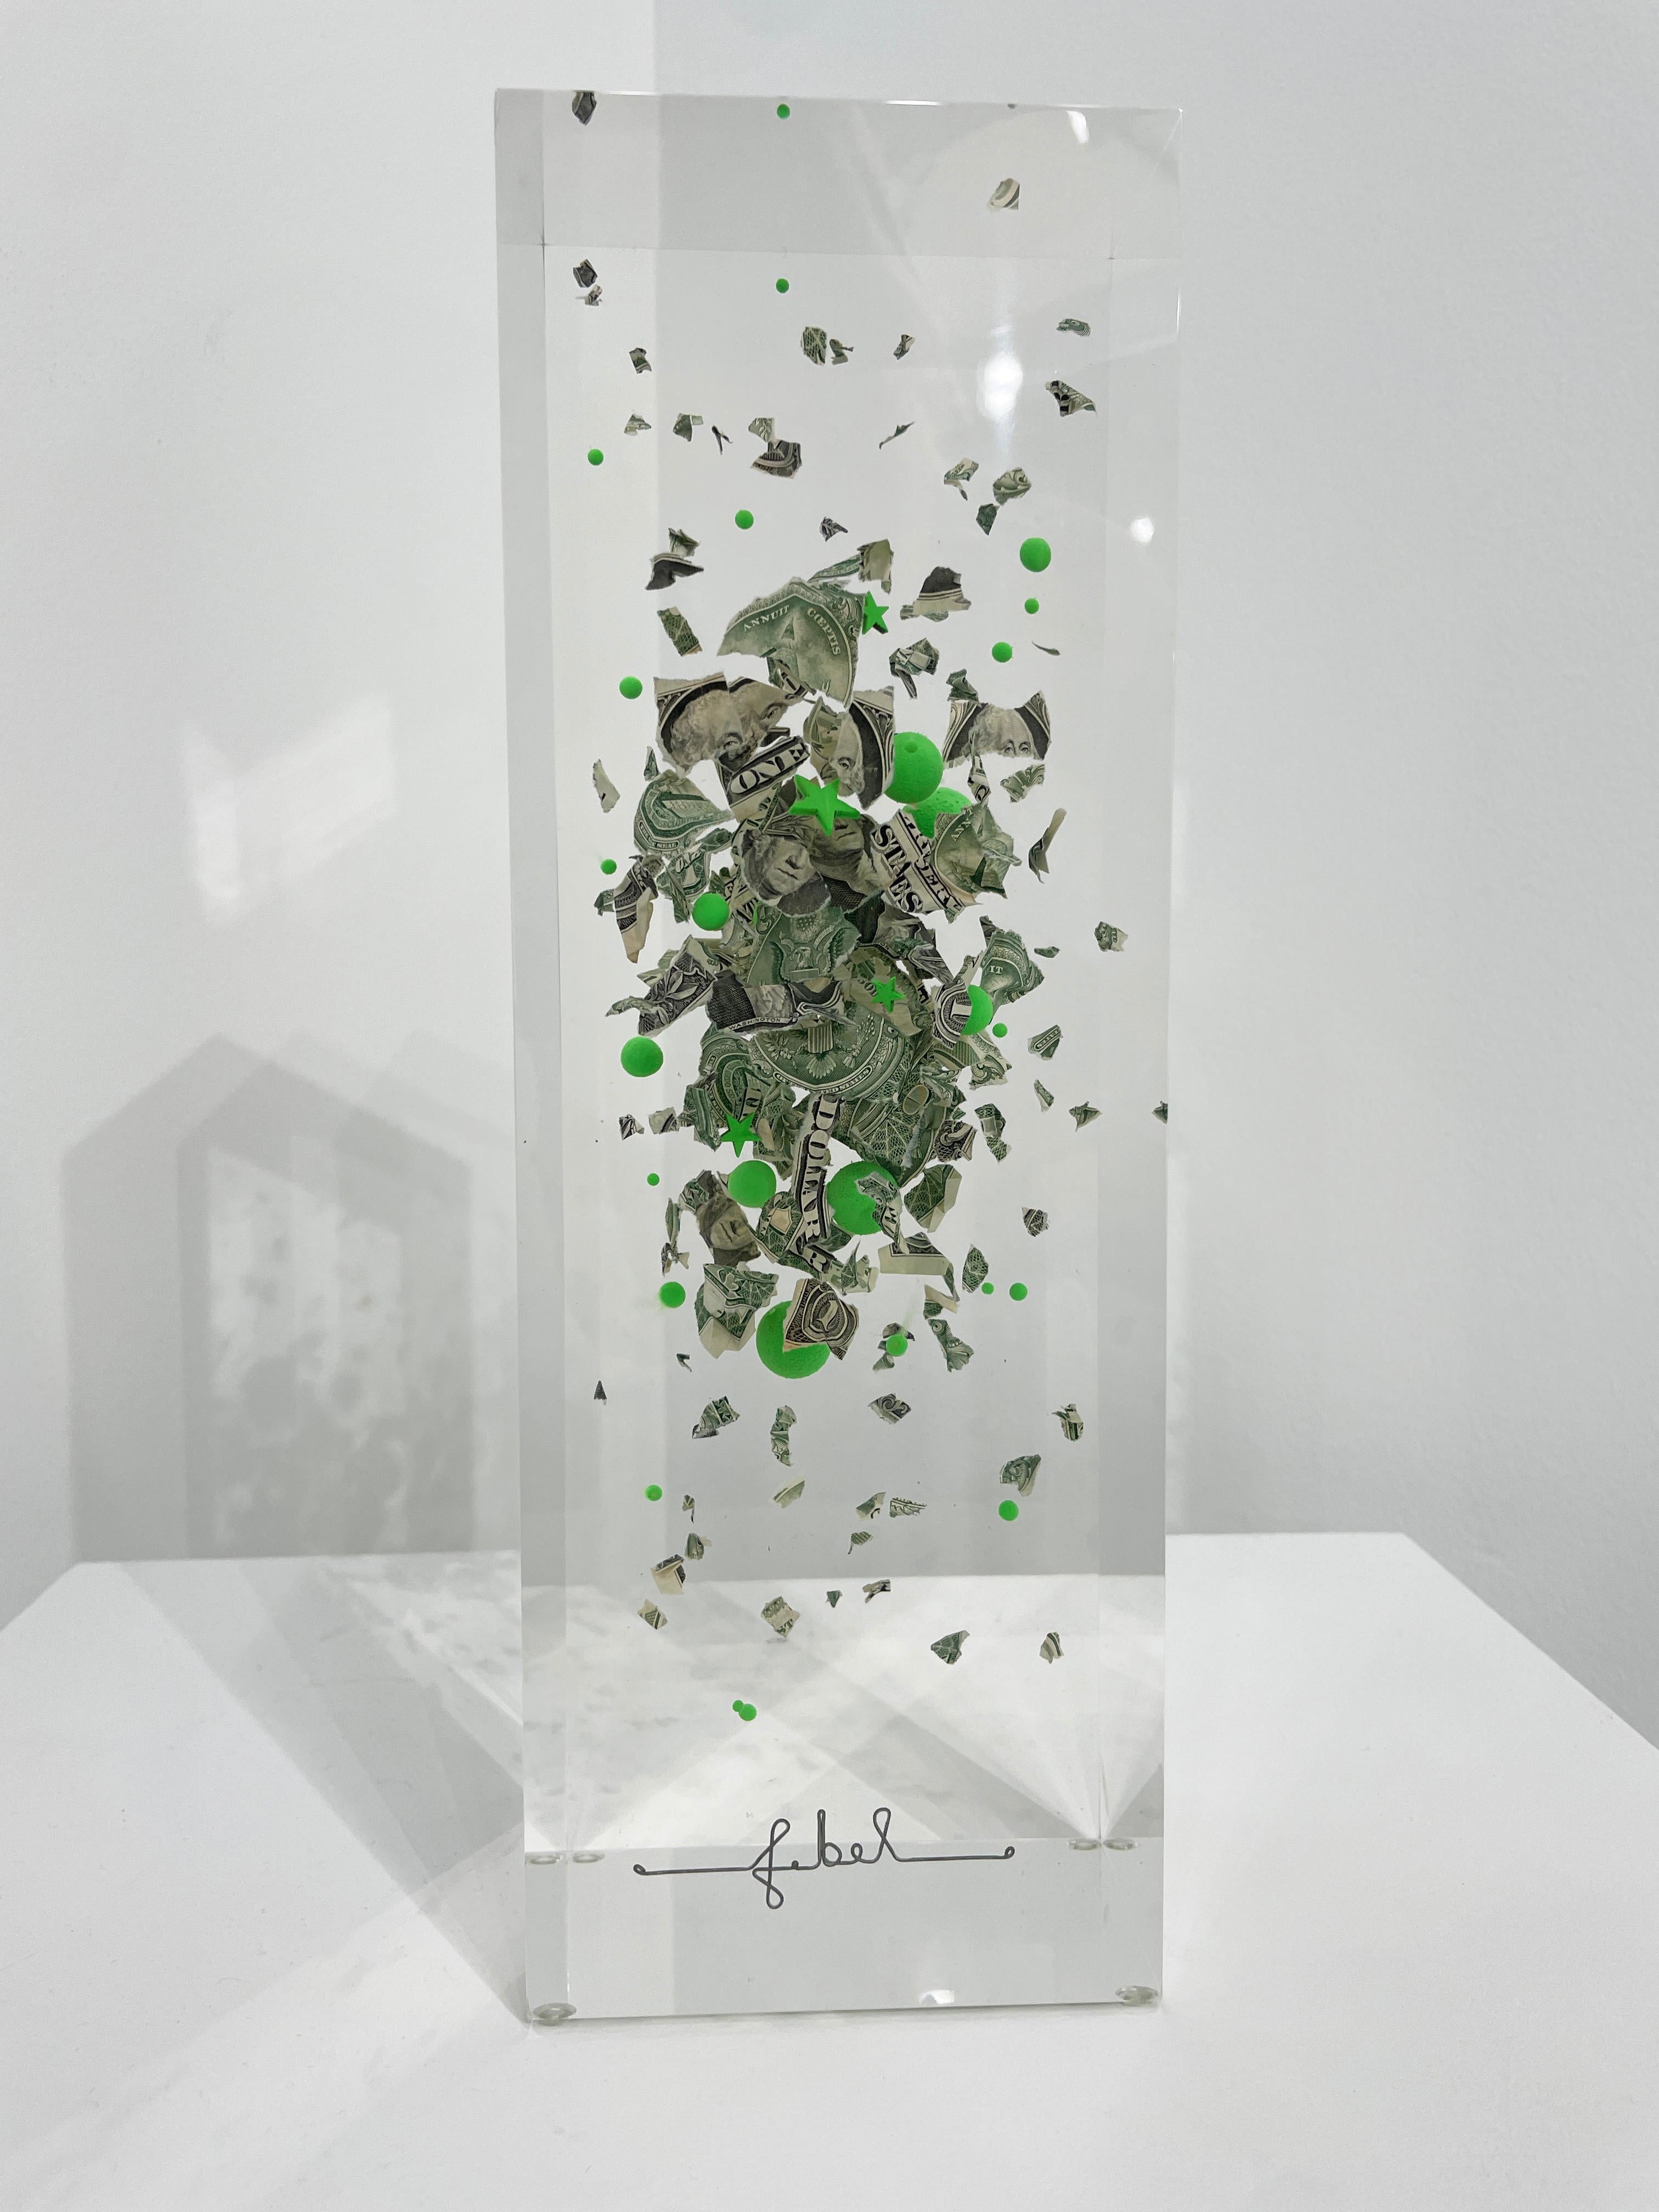 Francois Bel Abstract Sculpture - Dollars and Green Bubbles